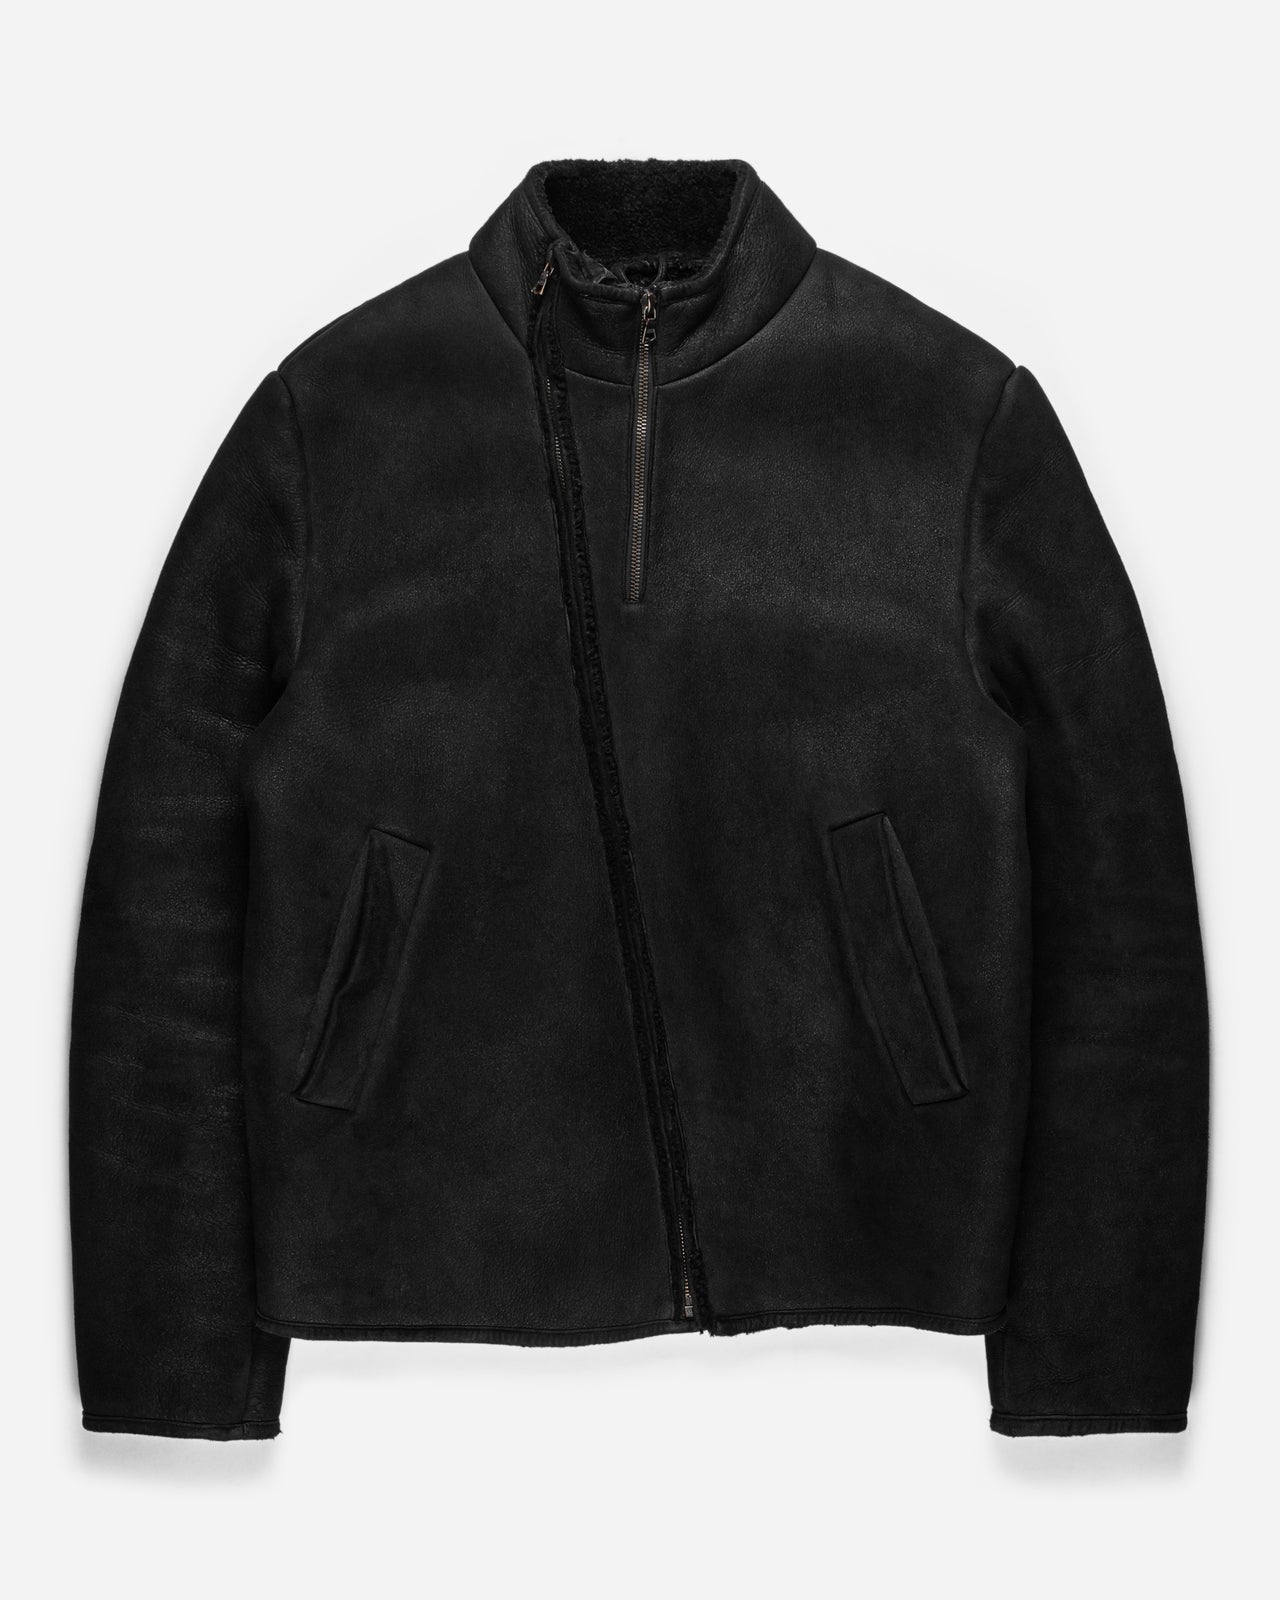 Ruffo Research by Raf Simons Lambskin Leather Jacket - AW99